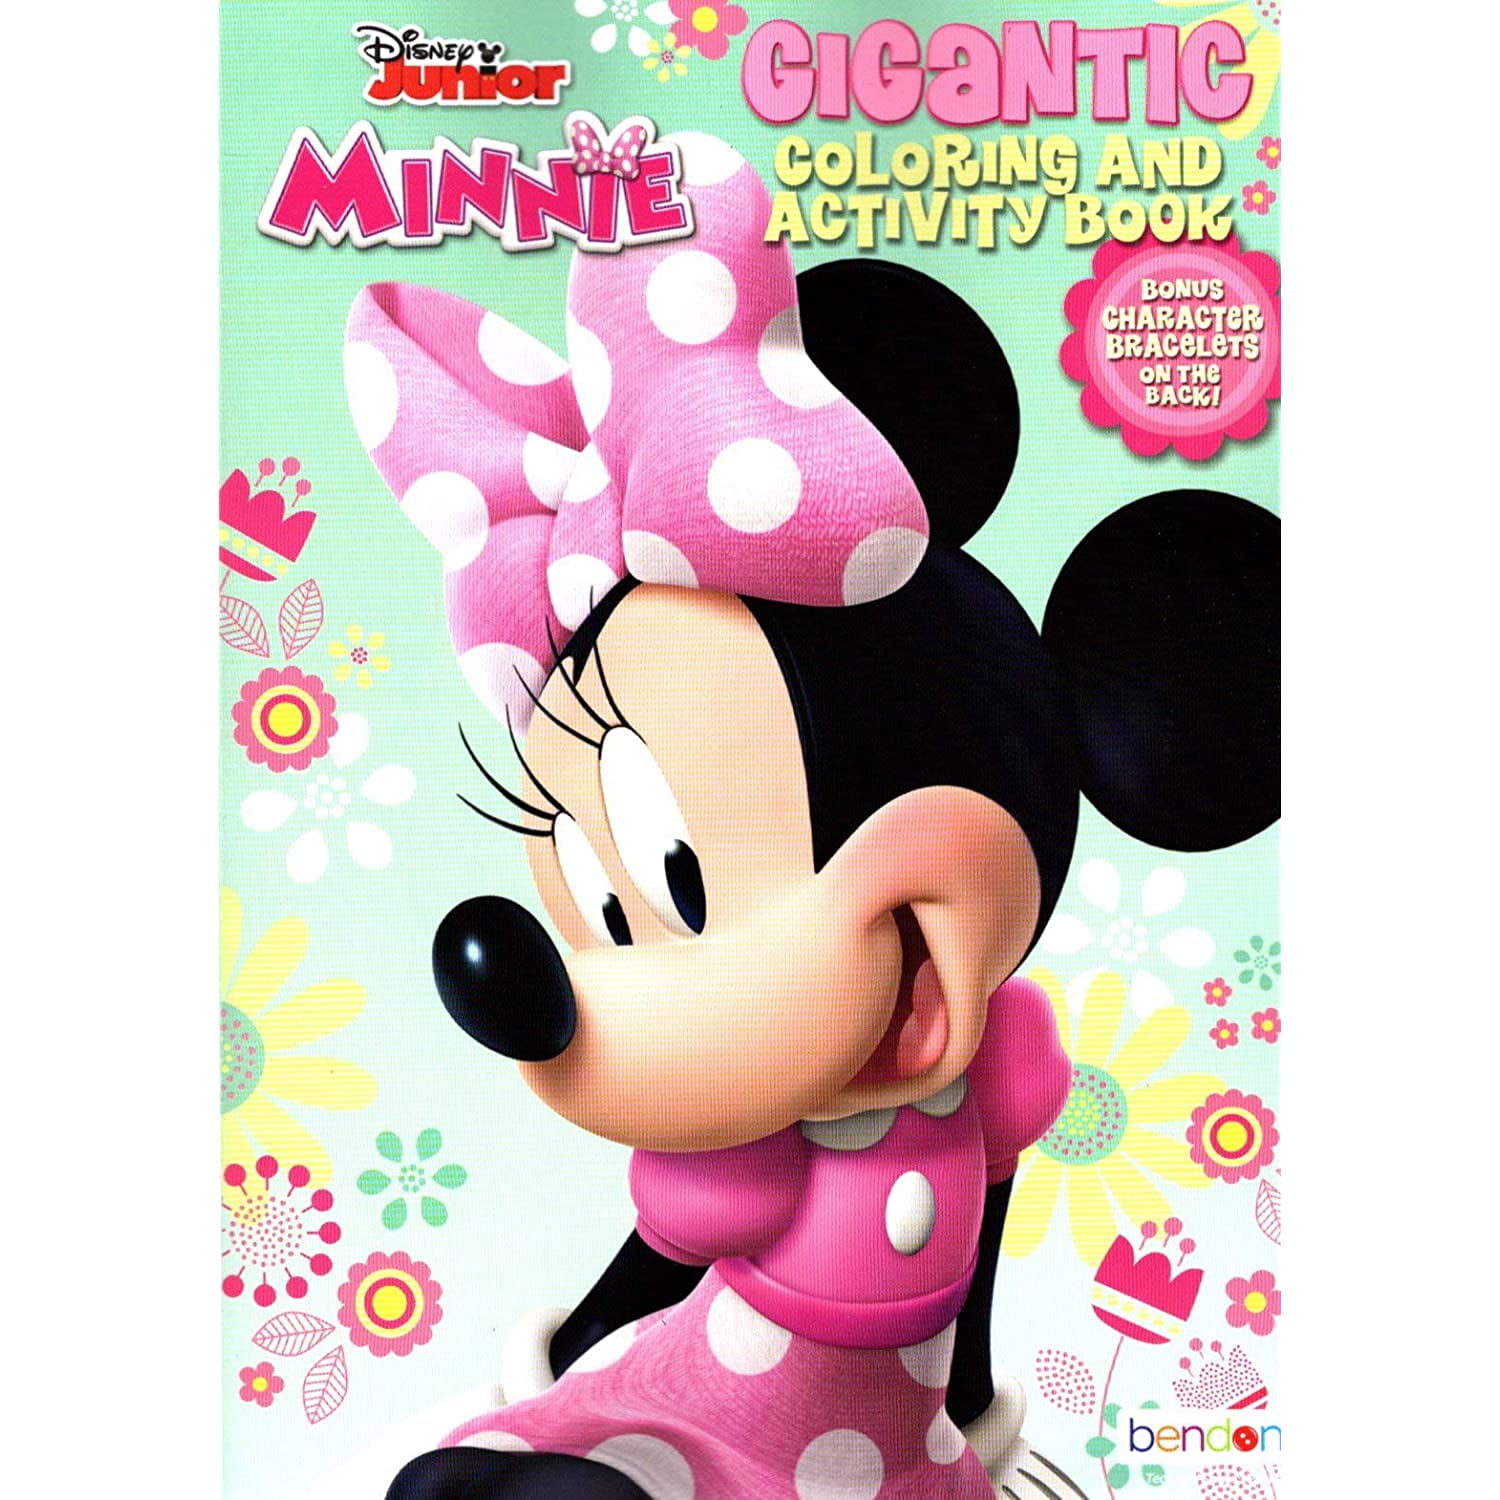 Disney Minnie Mouse Travel Bag Bundle 4 Pack Minnie Activity Set and Minnie Stickers Minnie Mouse Travel Set with Coloring Books Games Puzzles 